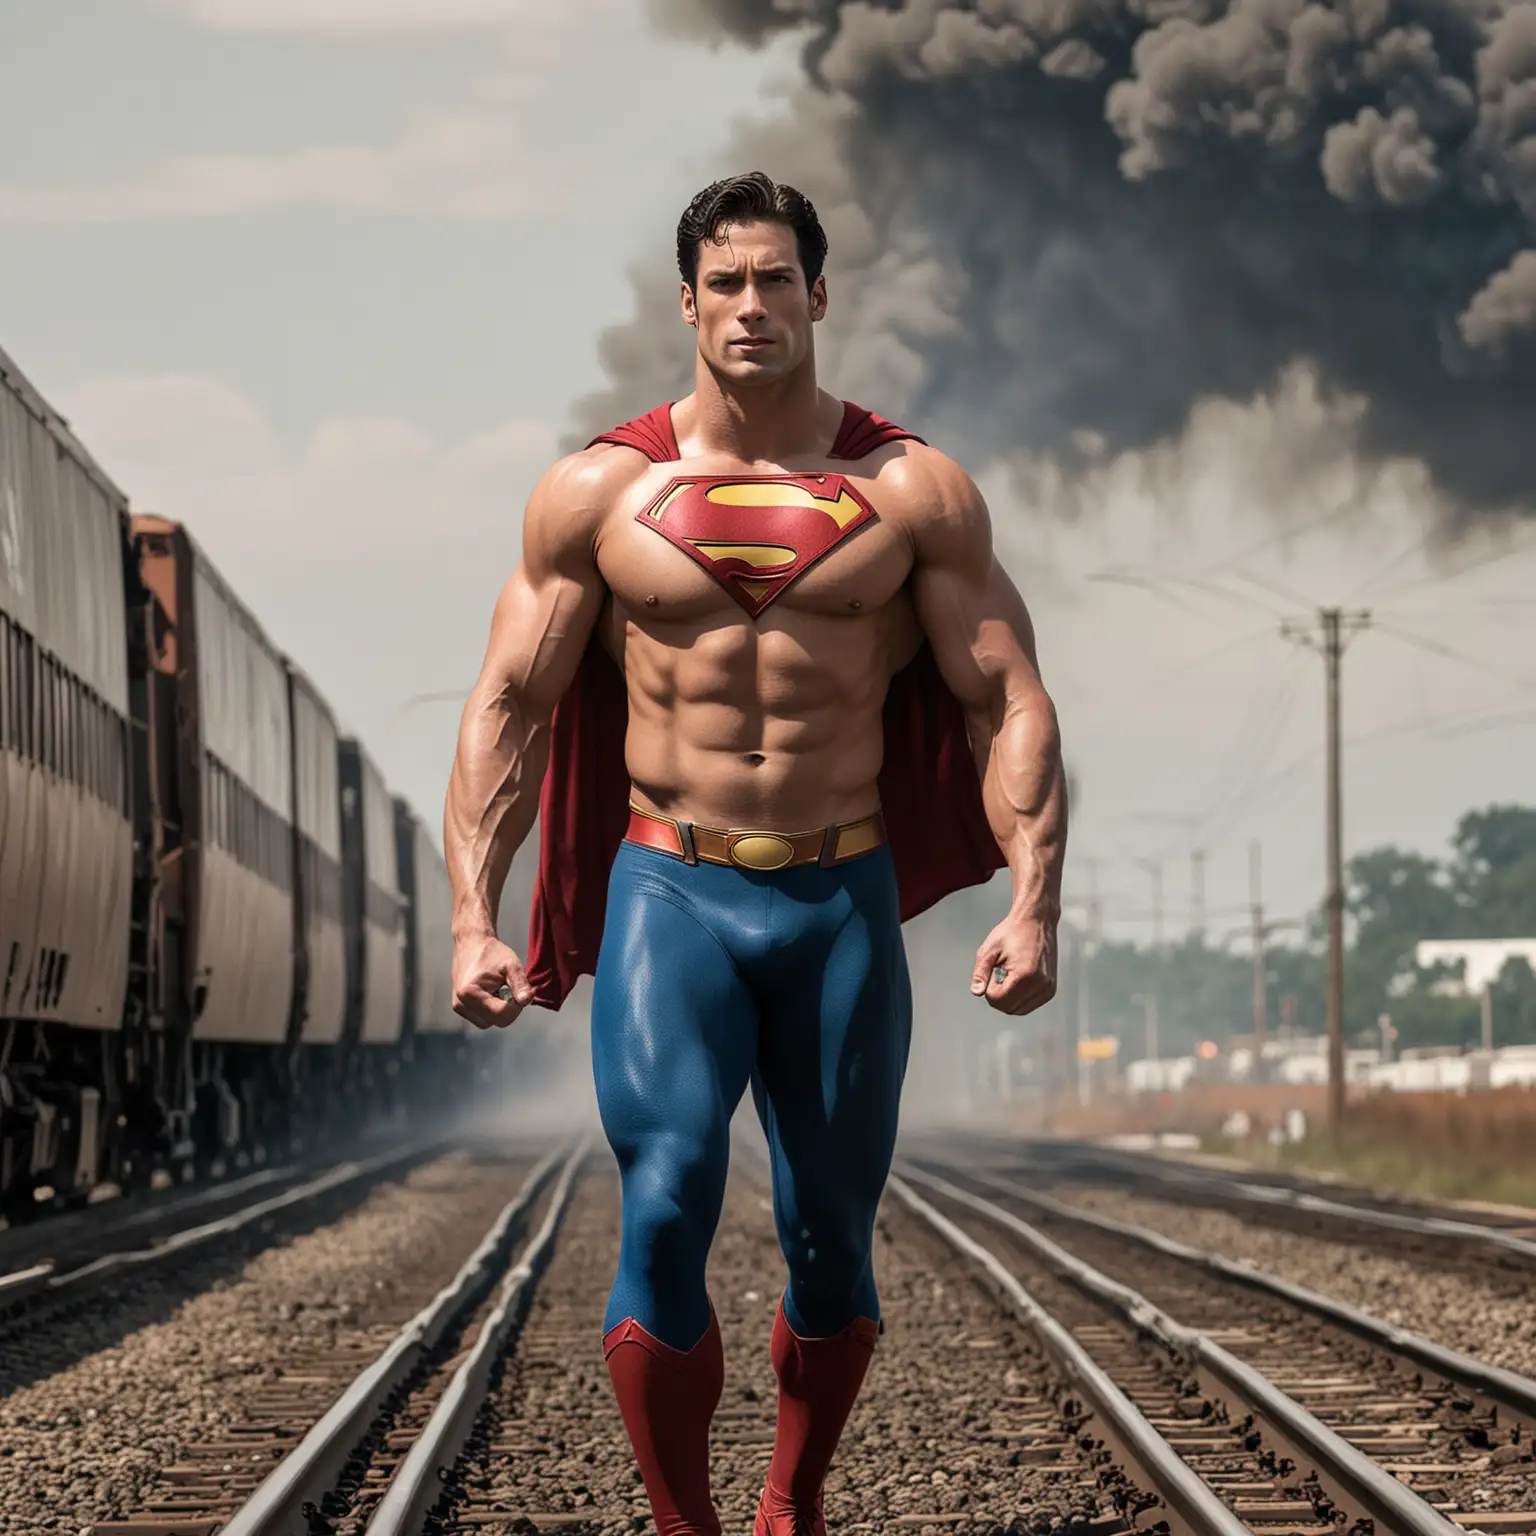 bare chested super muscular superman stopping a runway train